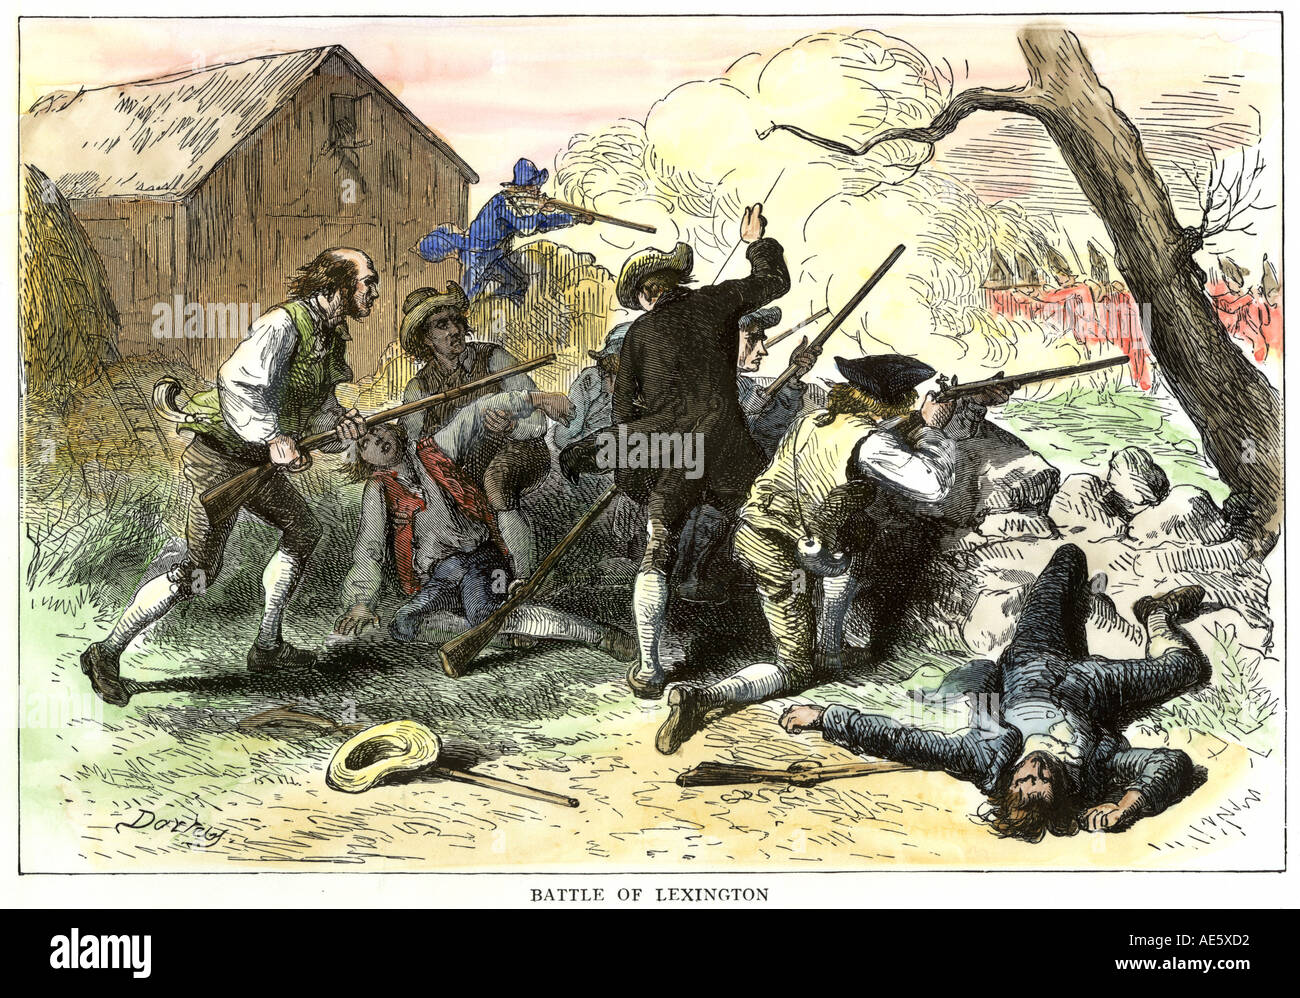 Minutemen at the Battle of Lexington starting the American Revolutionary War 1775. Hand-colored woodcut Stock Photo